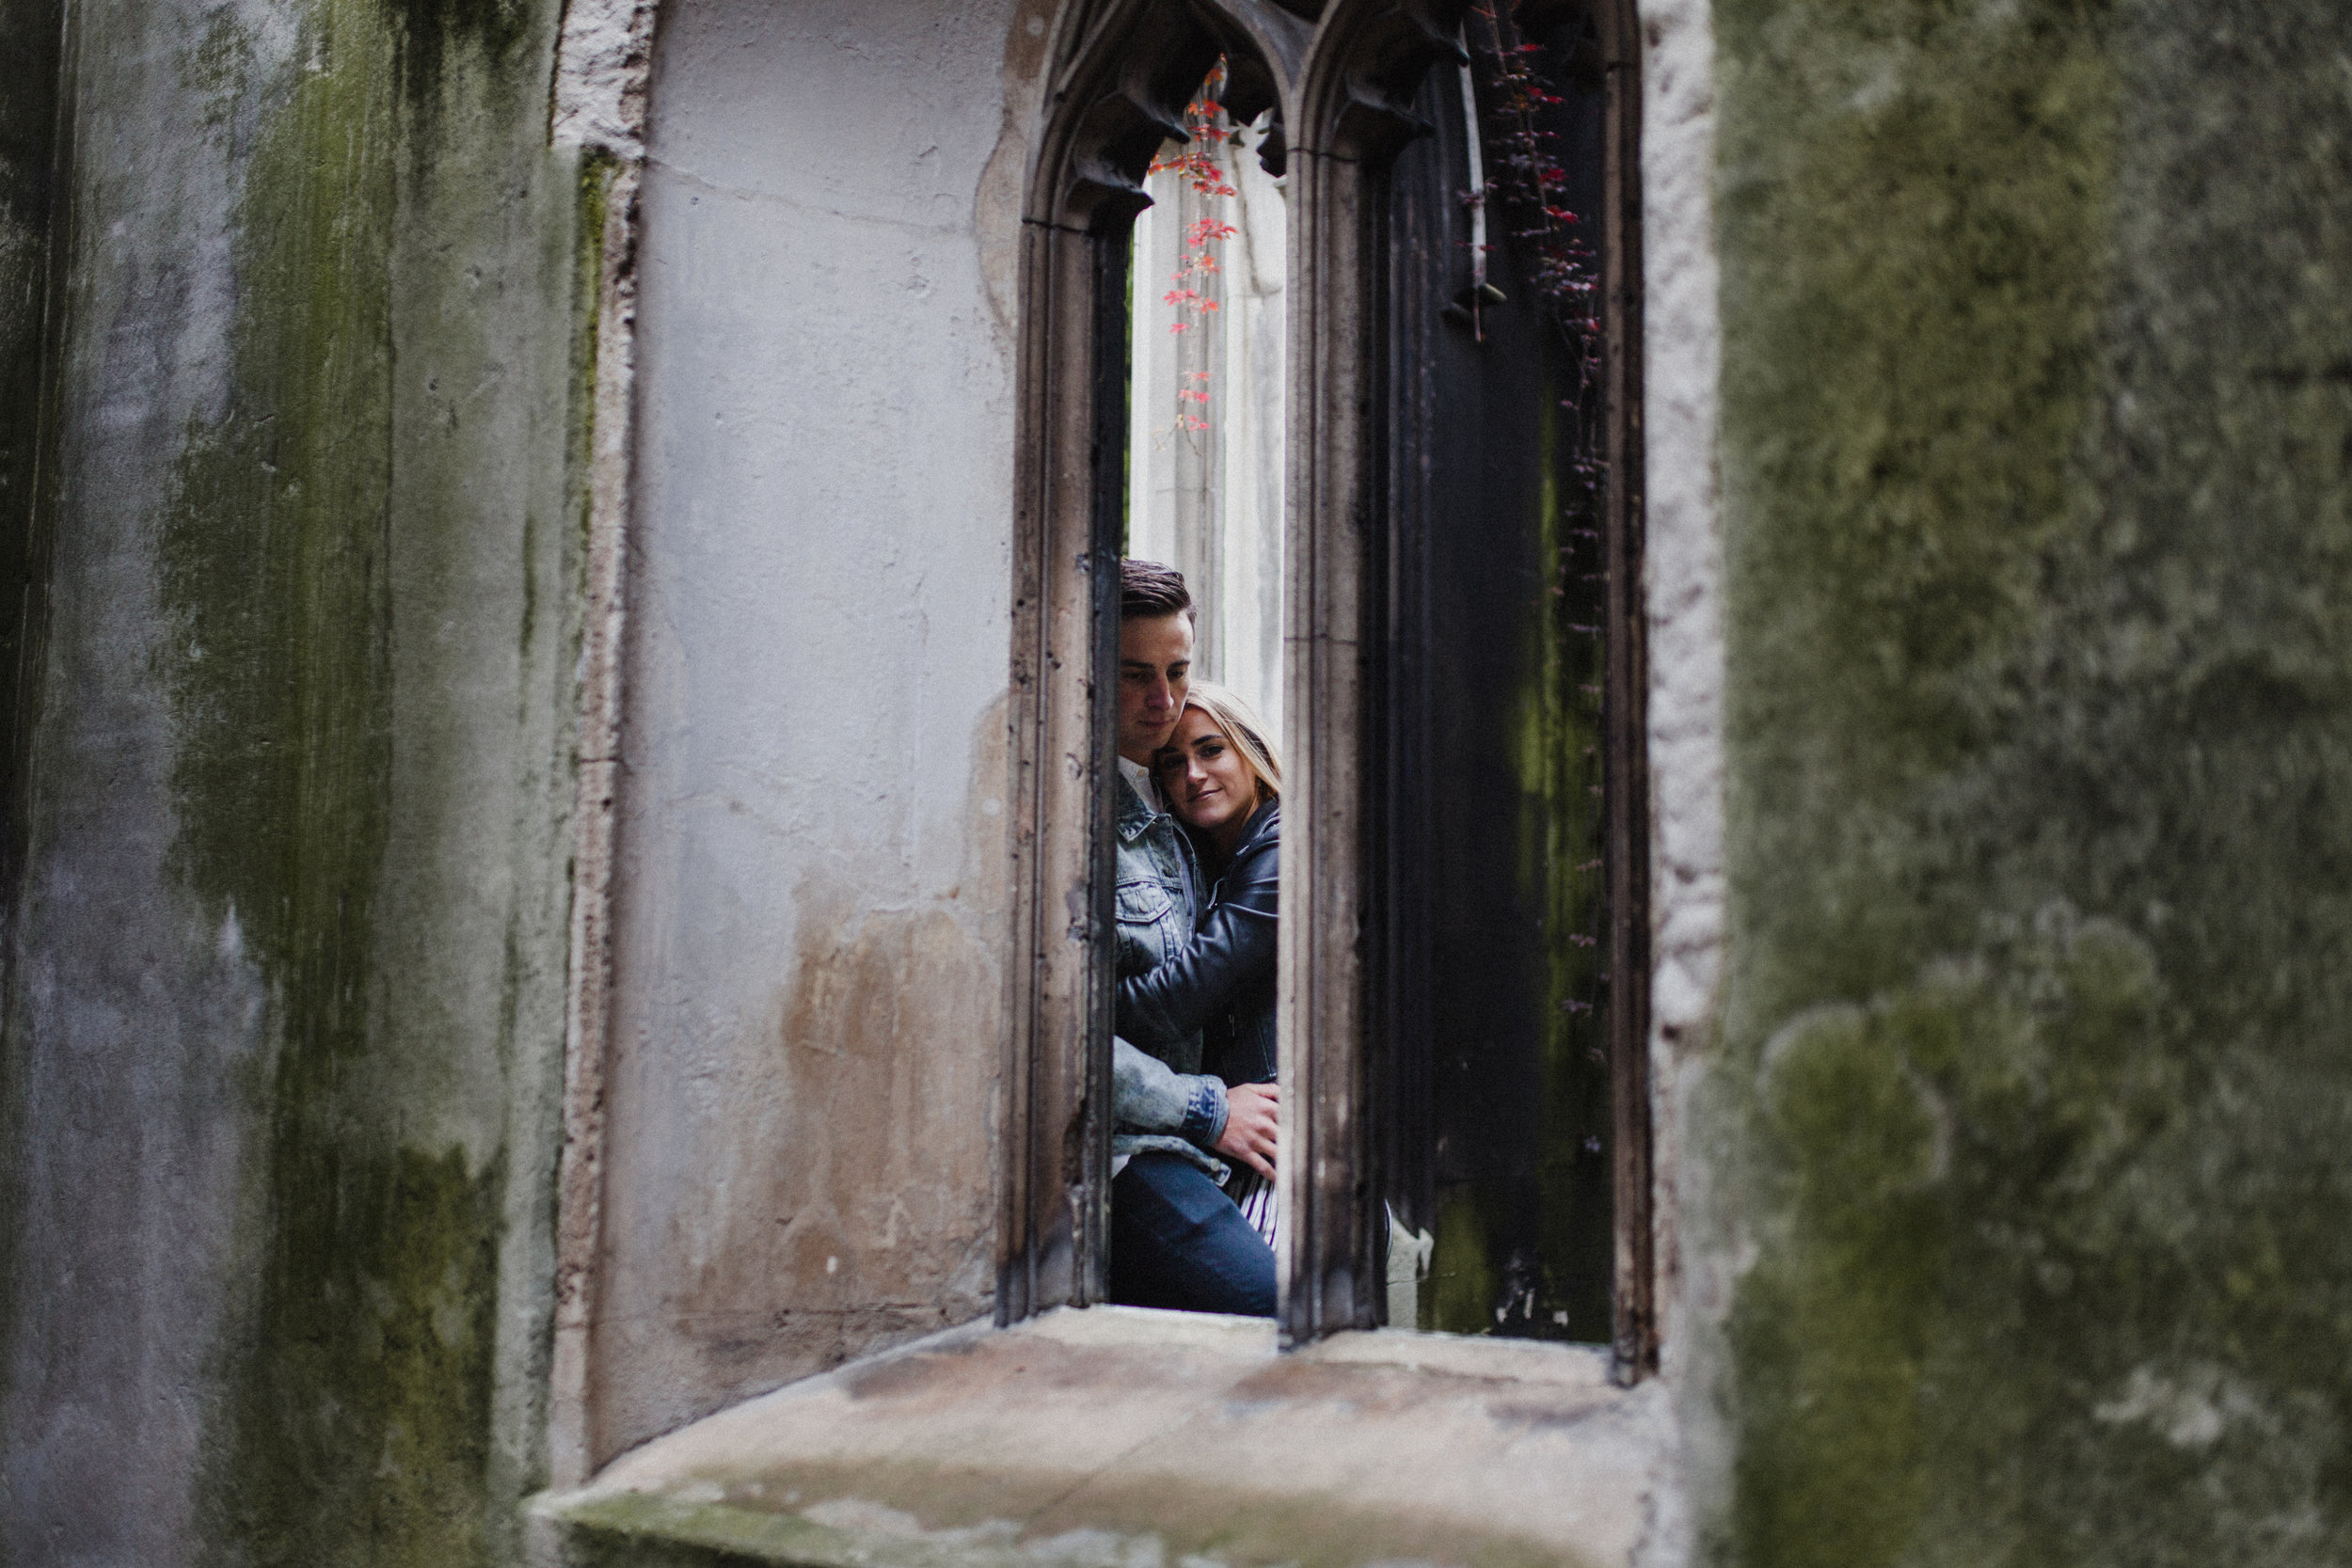 A portrait through a window in the ruins of St Dunstan-in-the-East, which is now a public garden.